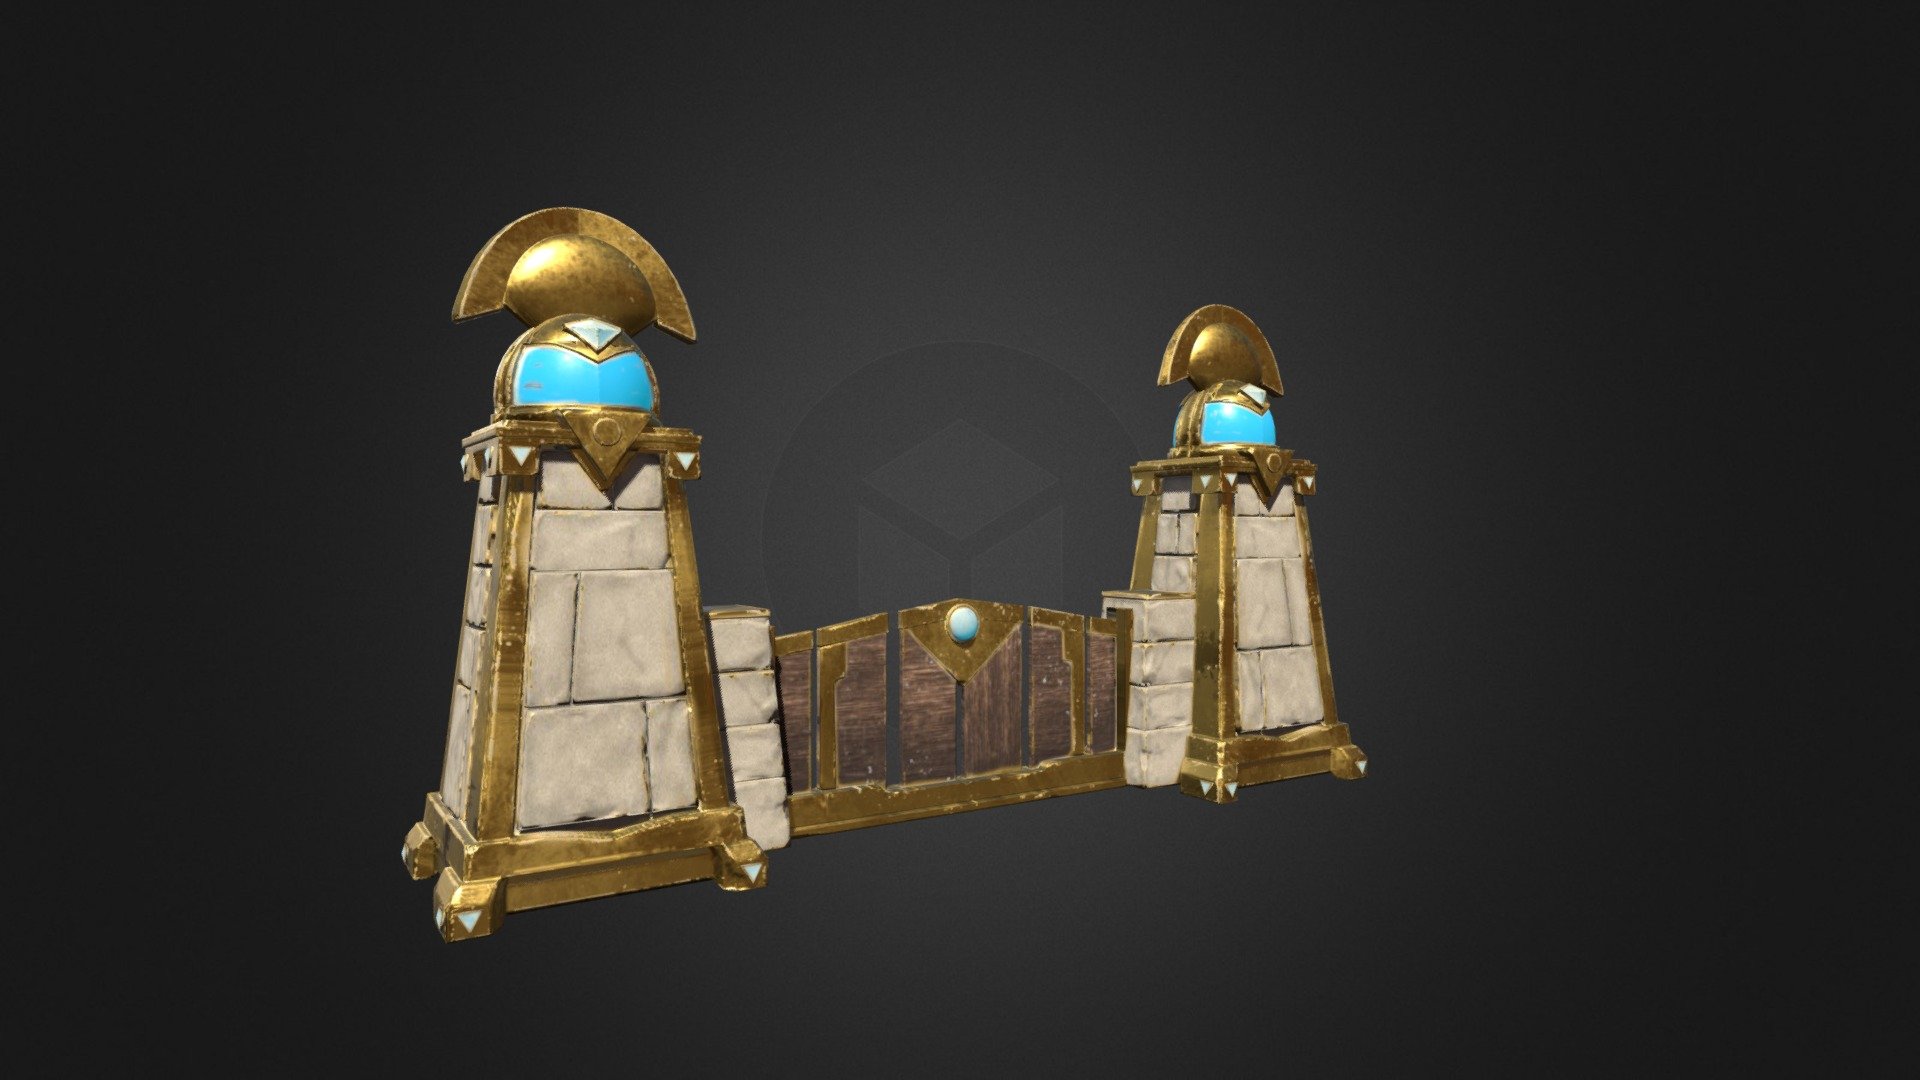 High Res Model of Heroes of the Storm Gate - HOS Gate - 3D model by cjmccaleb 3d model